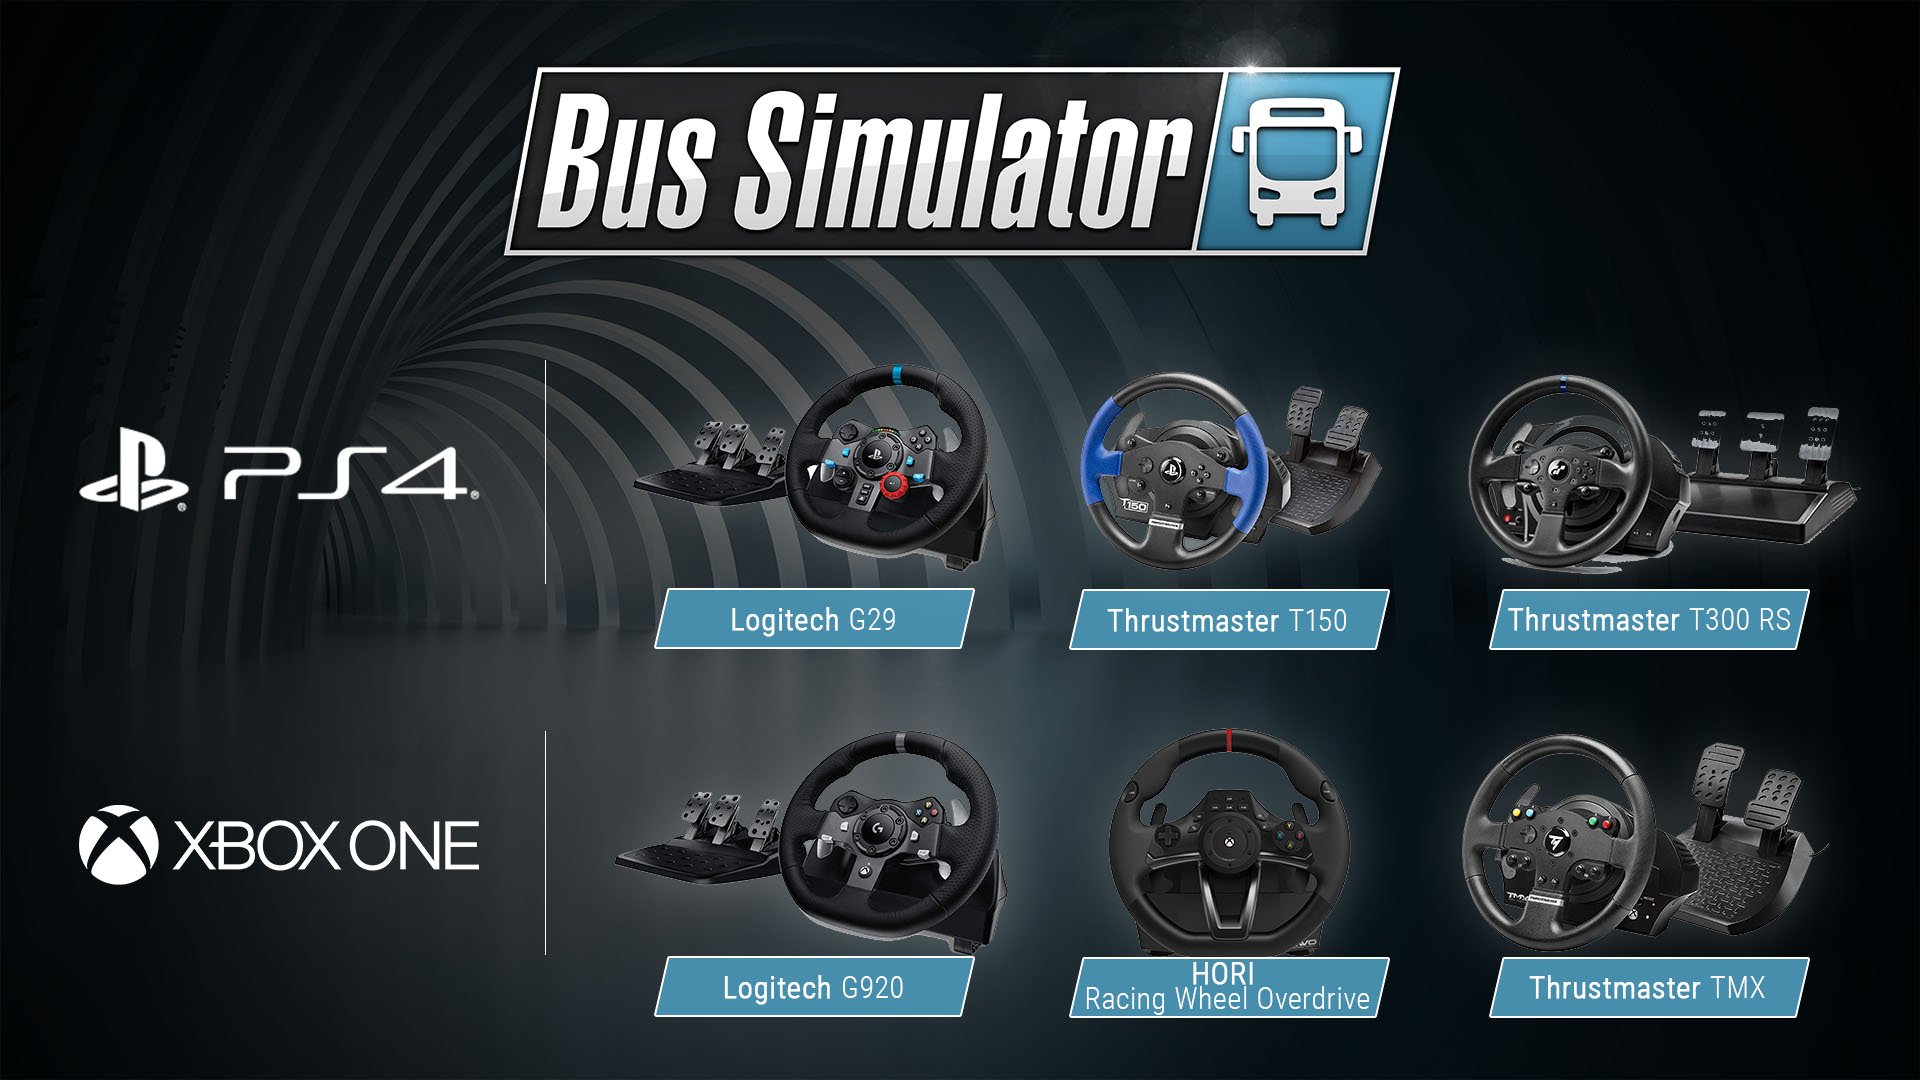 Bus Simulator On Twitter By Popular Demand Today We